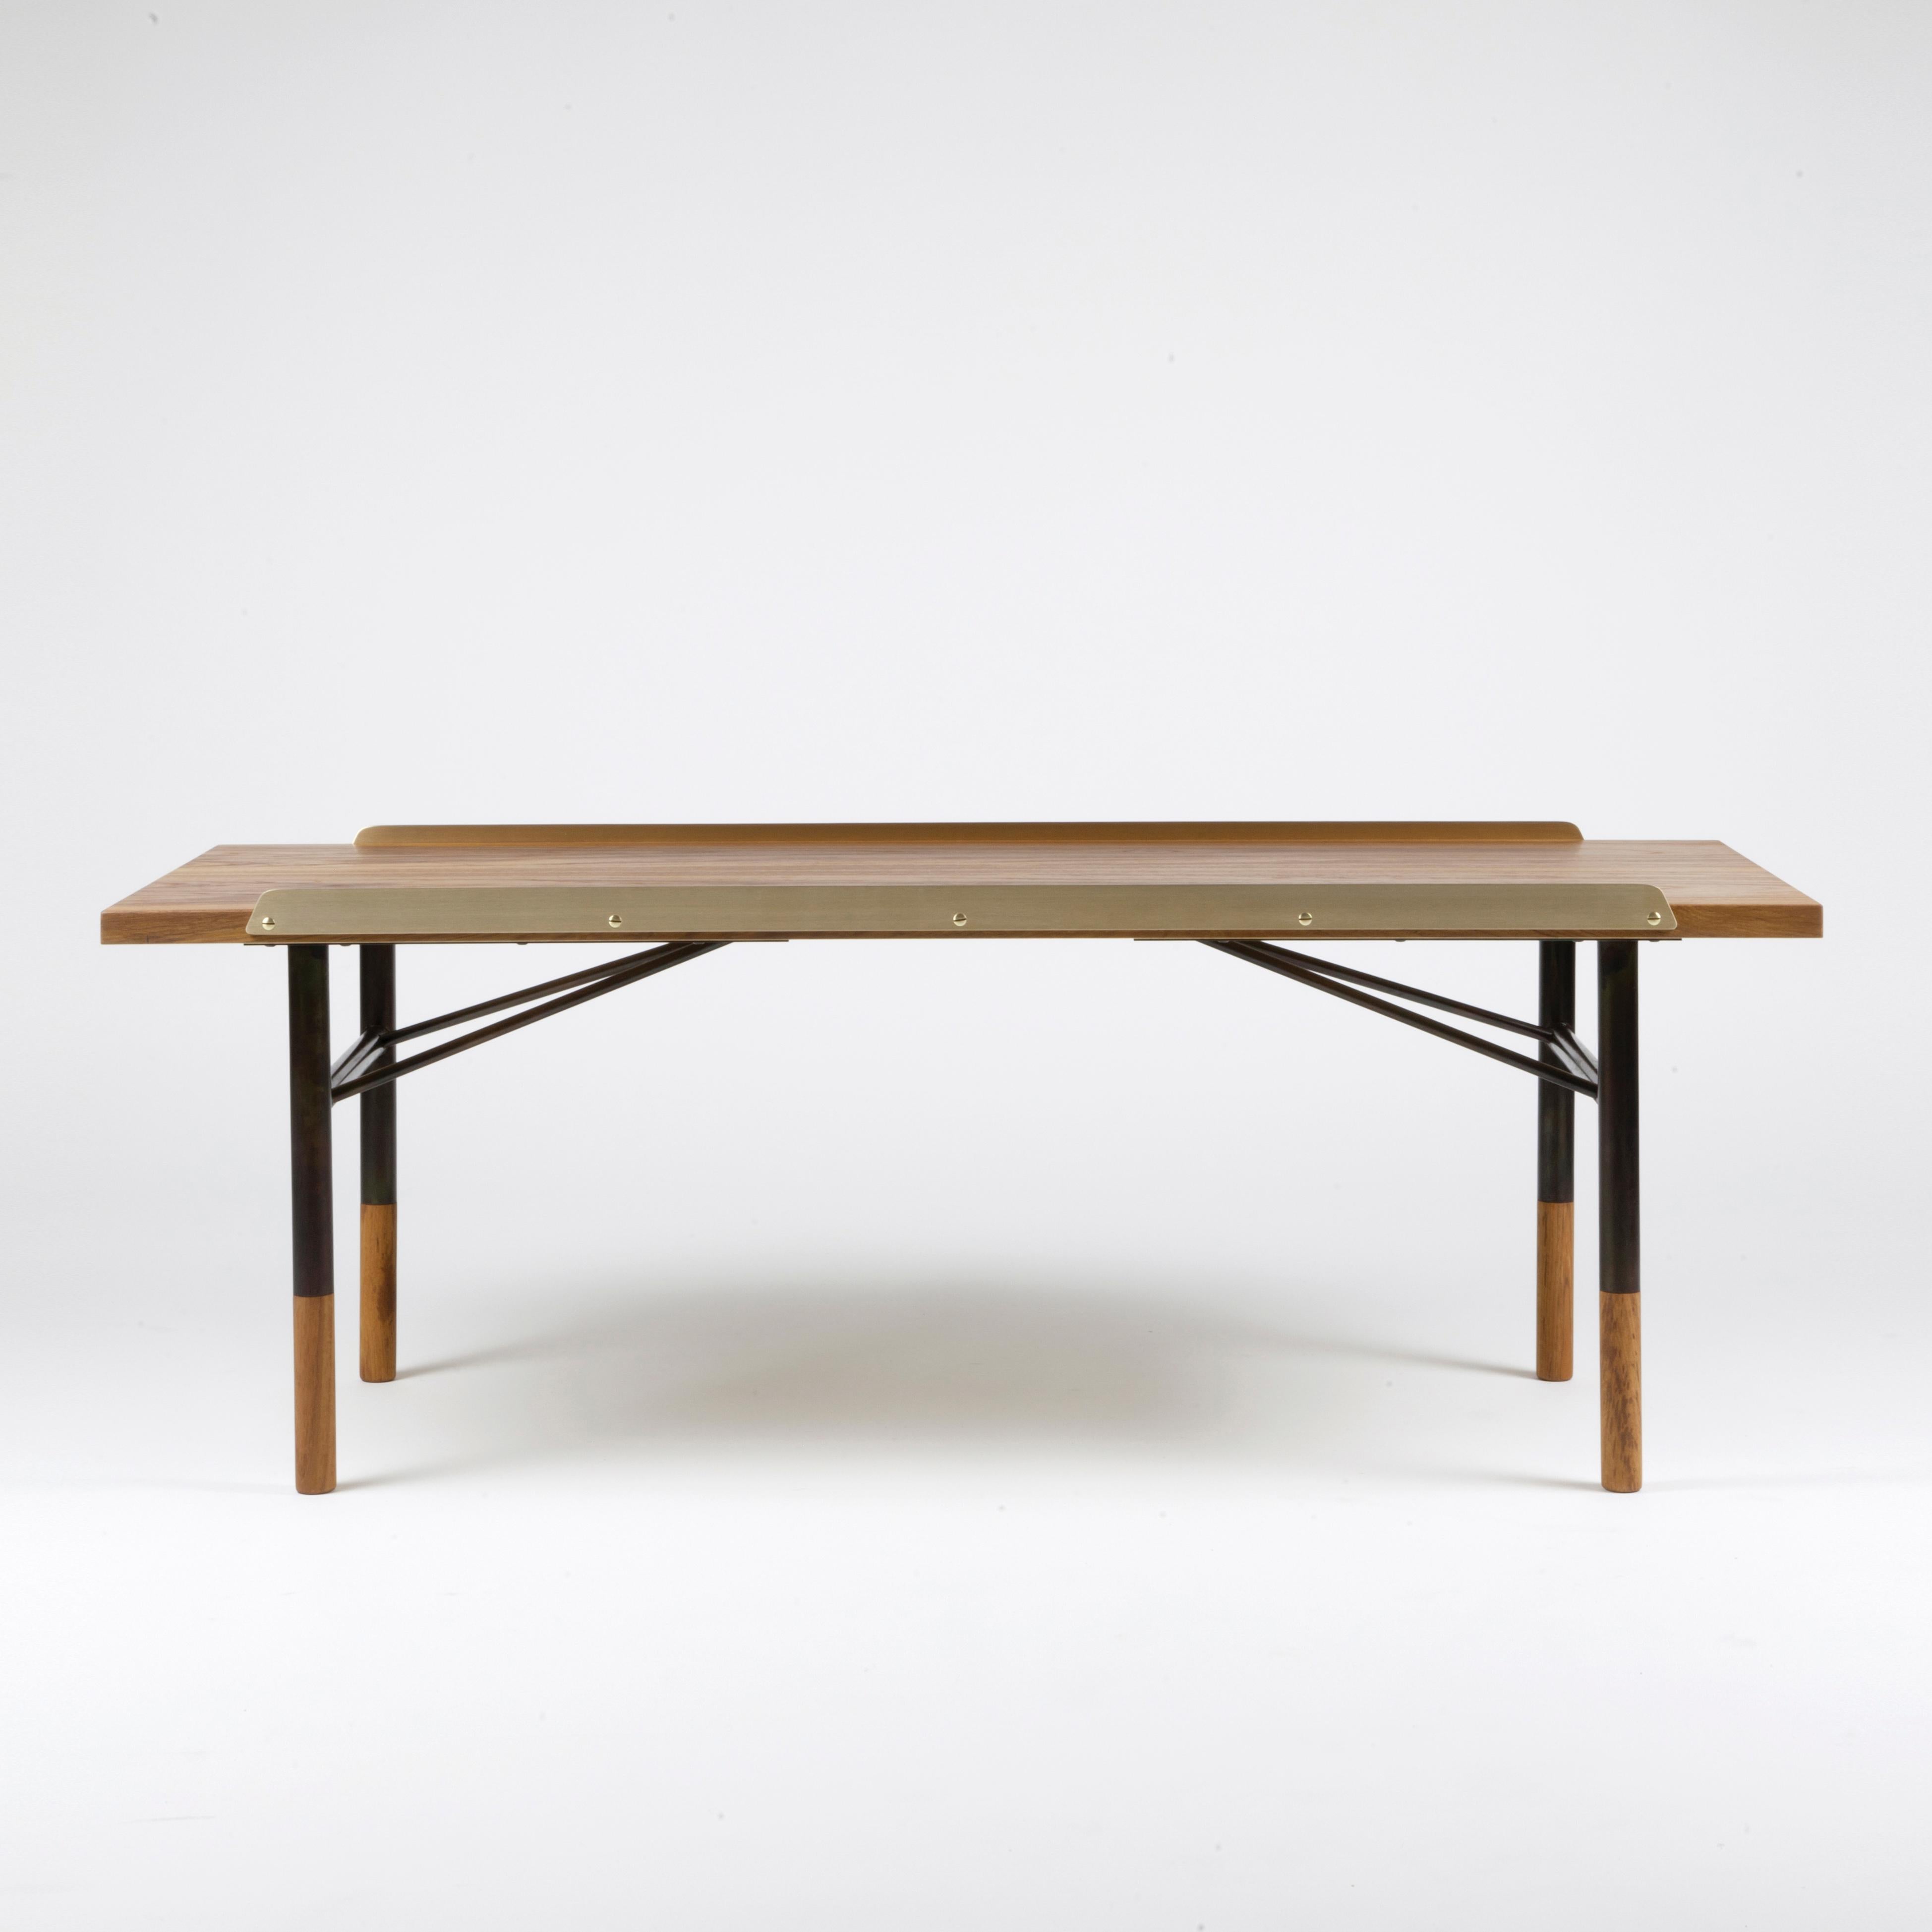 Table bench designed by Finn Juhl in 1953, relaunched in 2012.
Manufactured by House of Finn Juhl in Denmark.

Finn Juhl experienced an international breakthrough in the USA during the early 1950s. He subsequently designed a range of furniture with